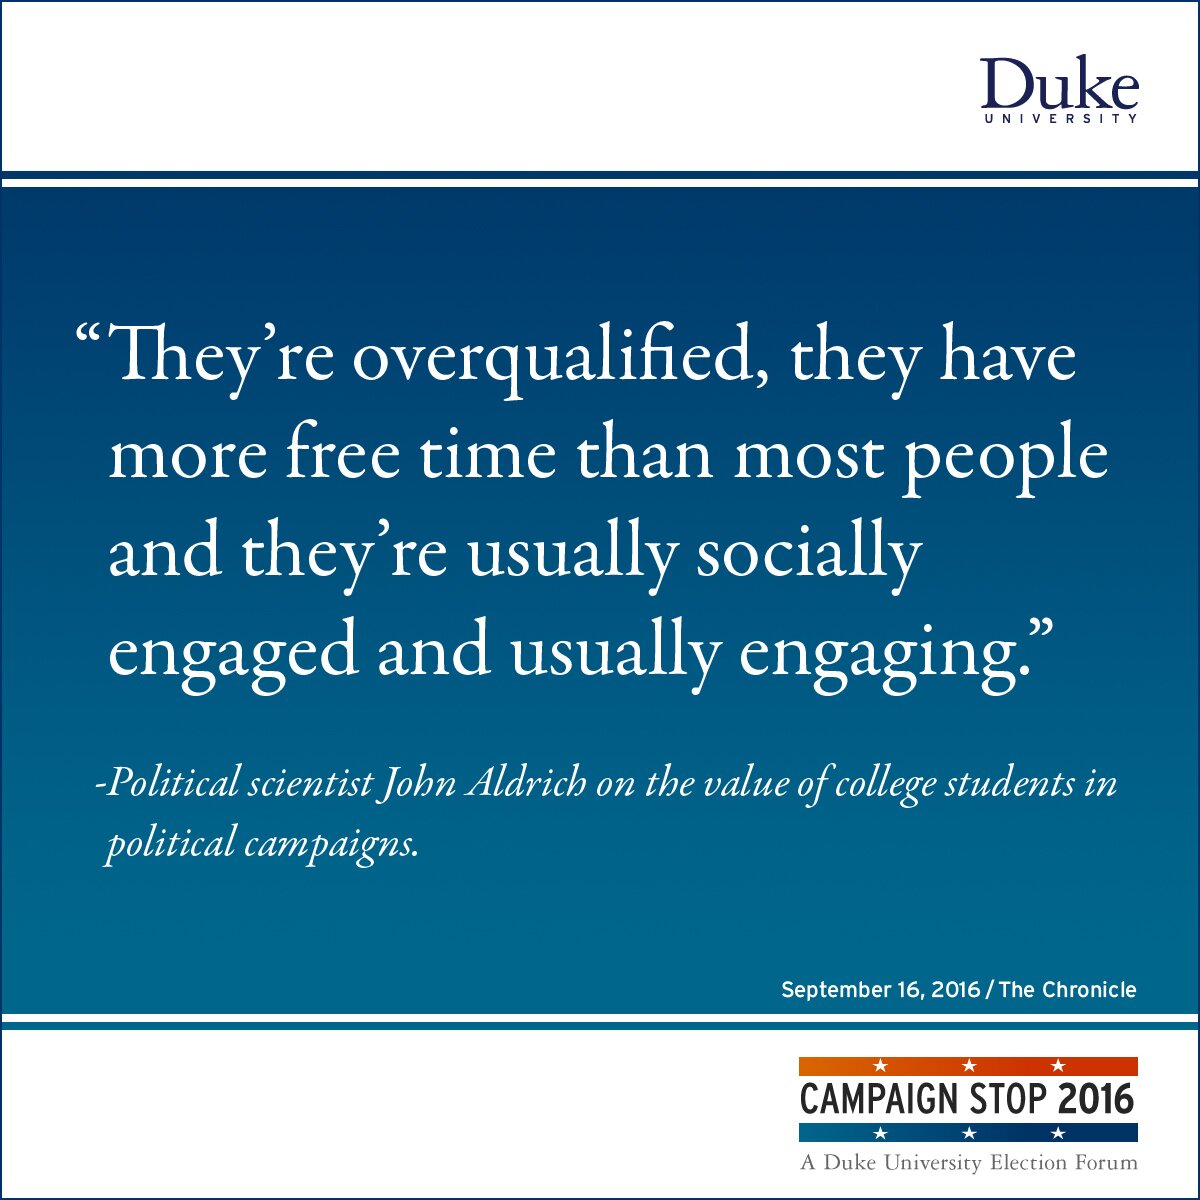 “They’re overqualified, they have more free time than most people and they’re usually socially engaged and usually engaging.” -Political scientist John Aldrich on the value of college students in political campaigns.